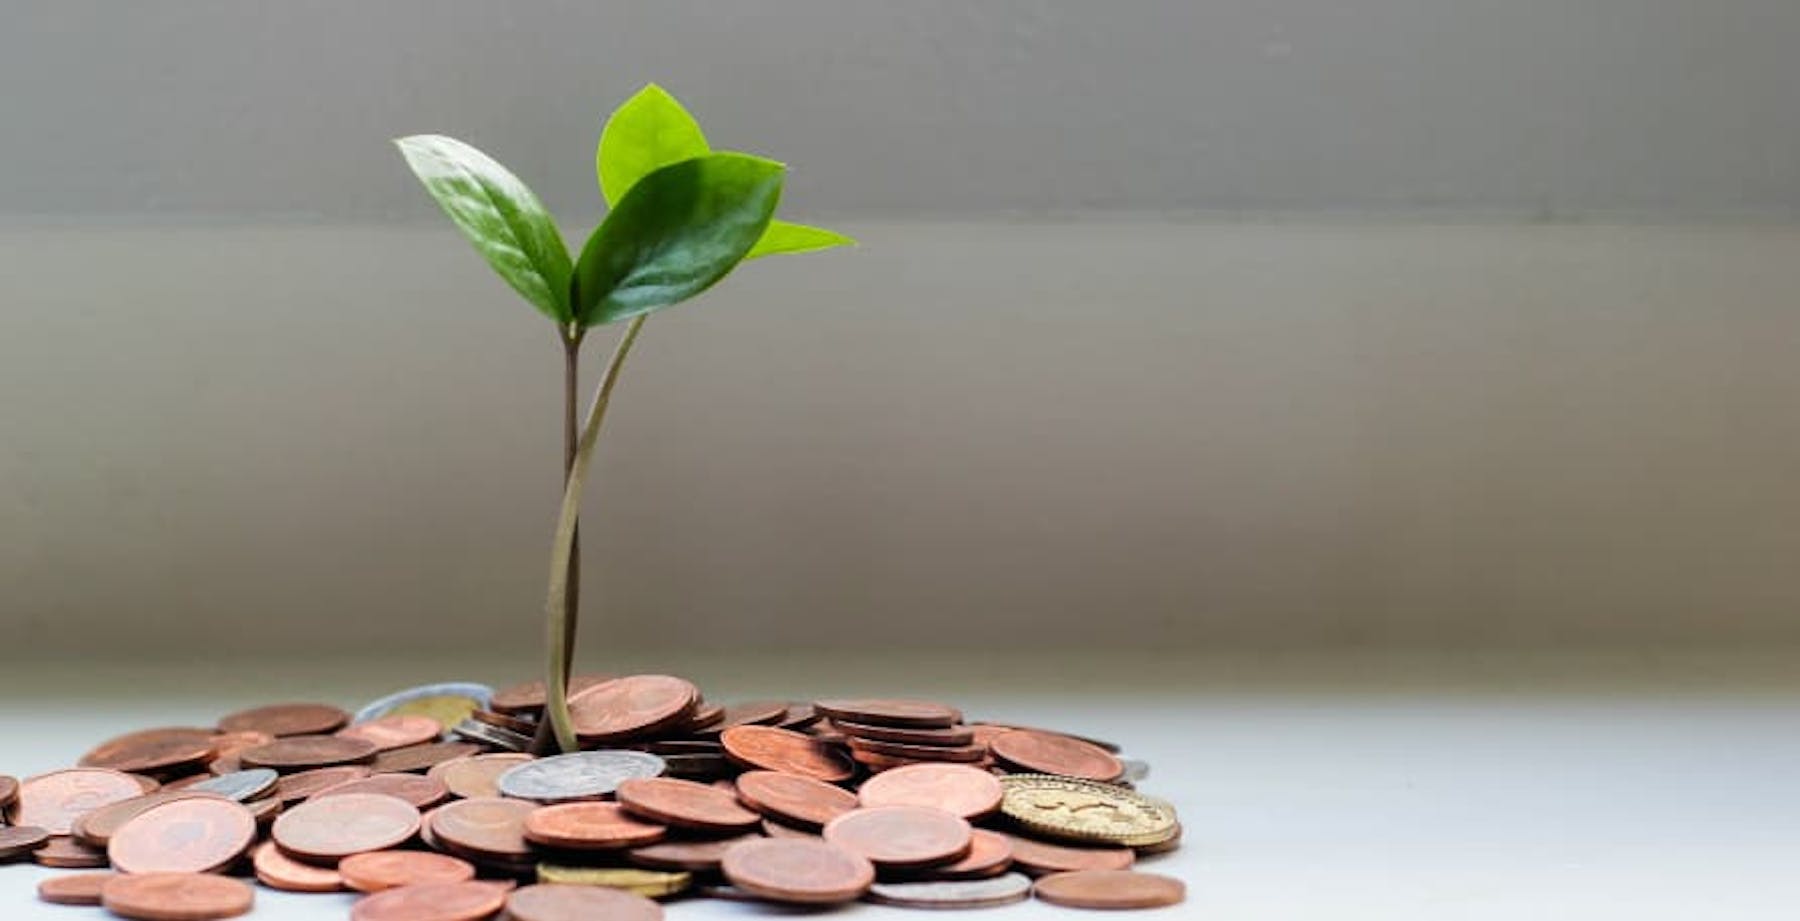 seedling sitting in pile of coins